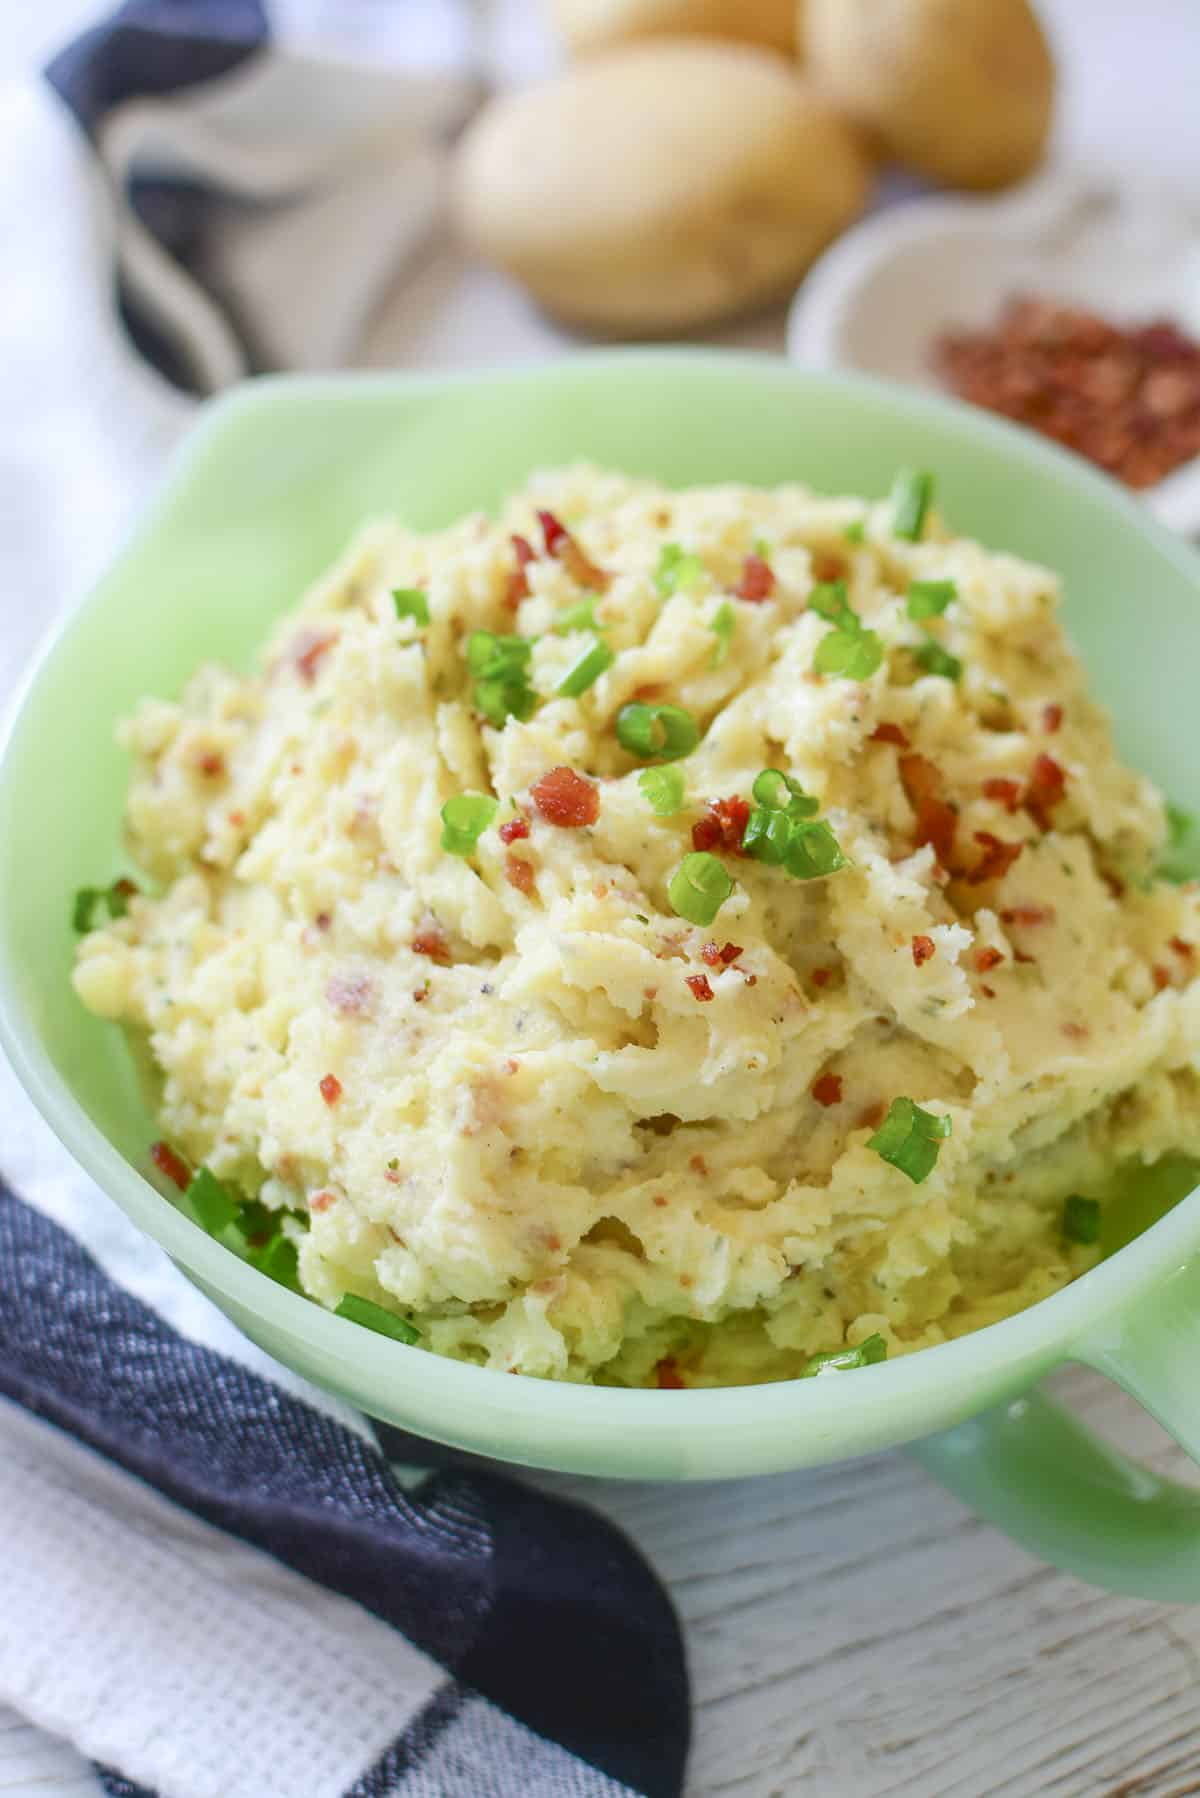 Boursin Mashed Potatoes in a green vintage bowl.